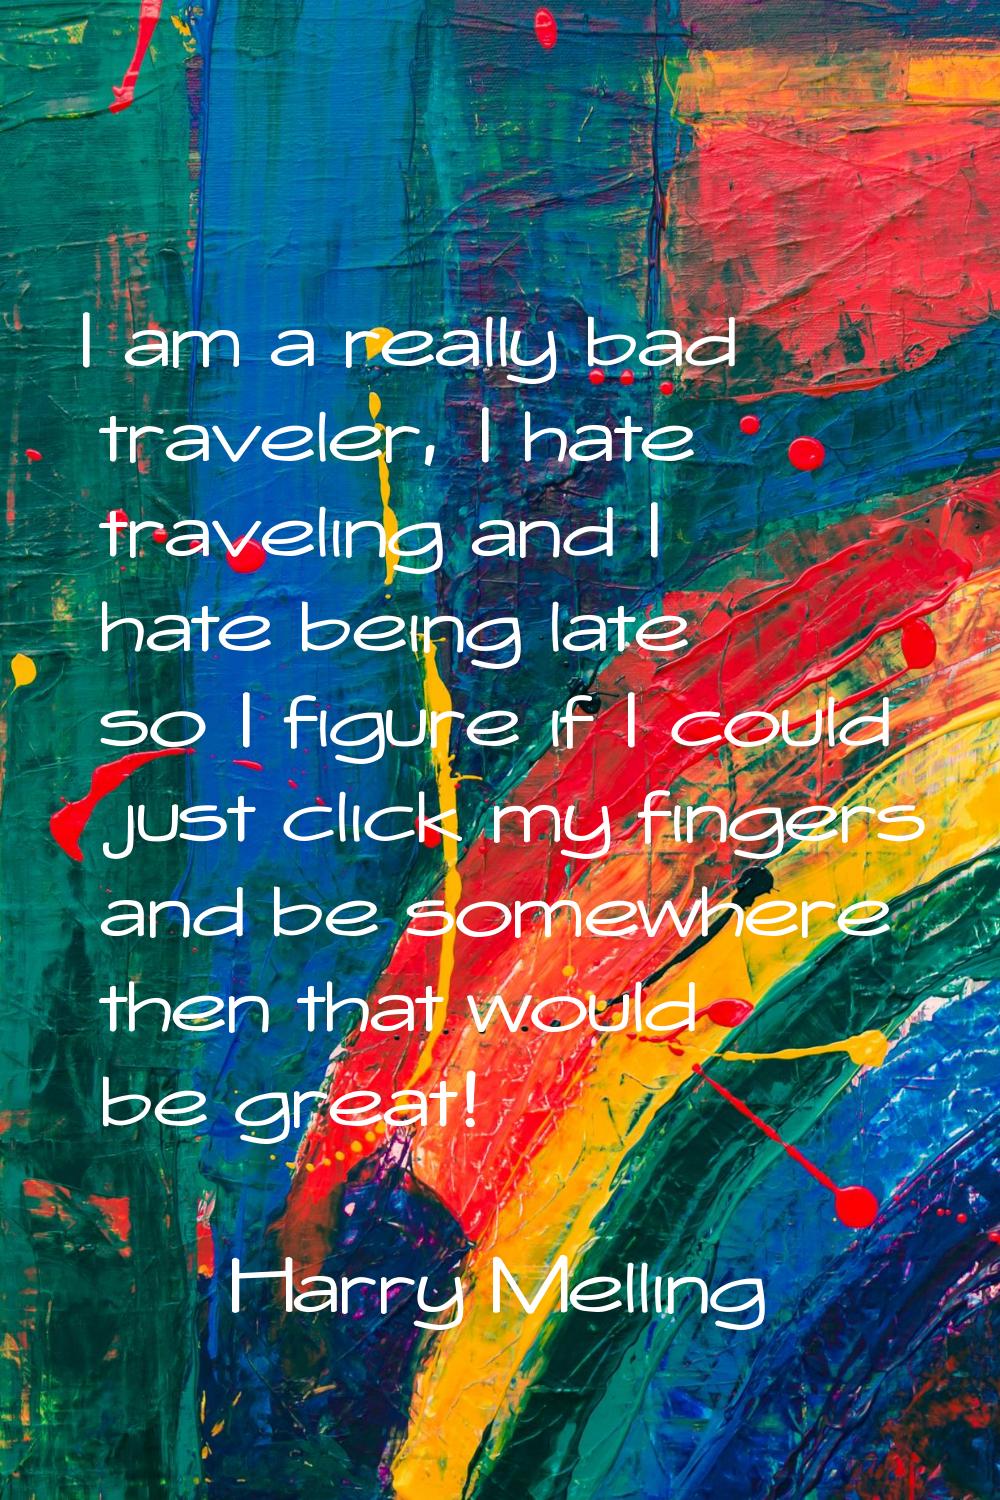 I am a really bad traveler, I hate traveling and I hate being late so I figure if I could just clic